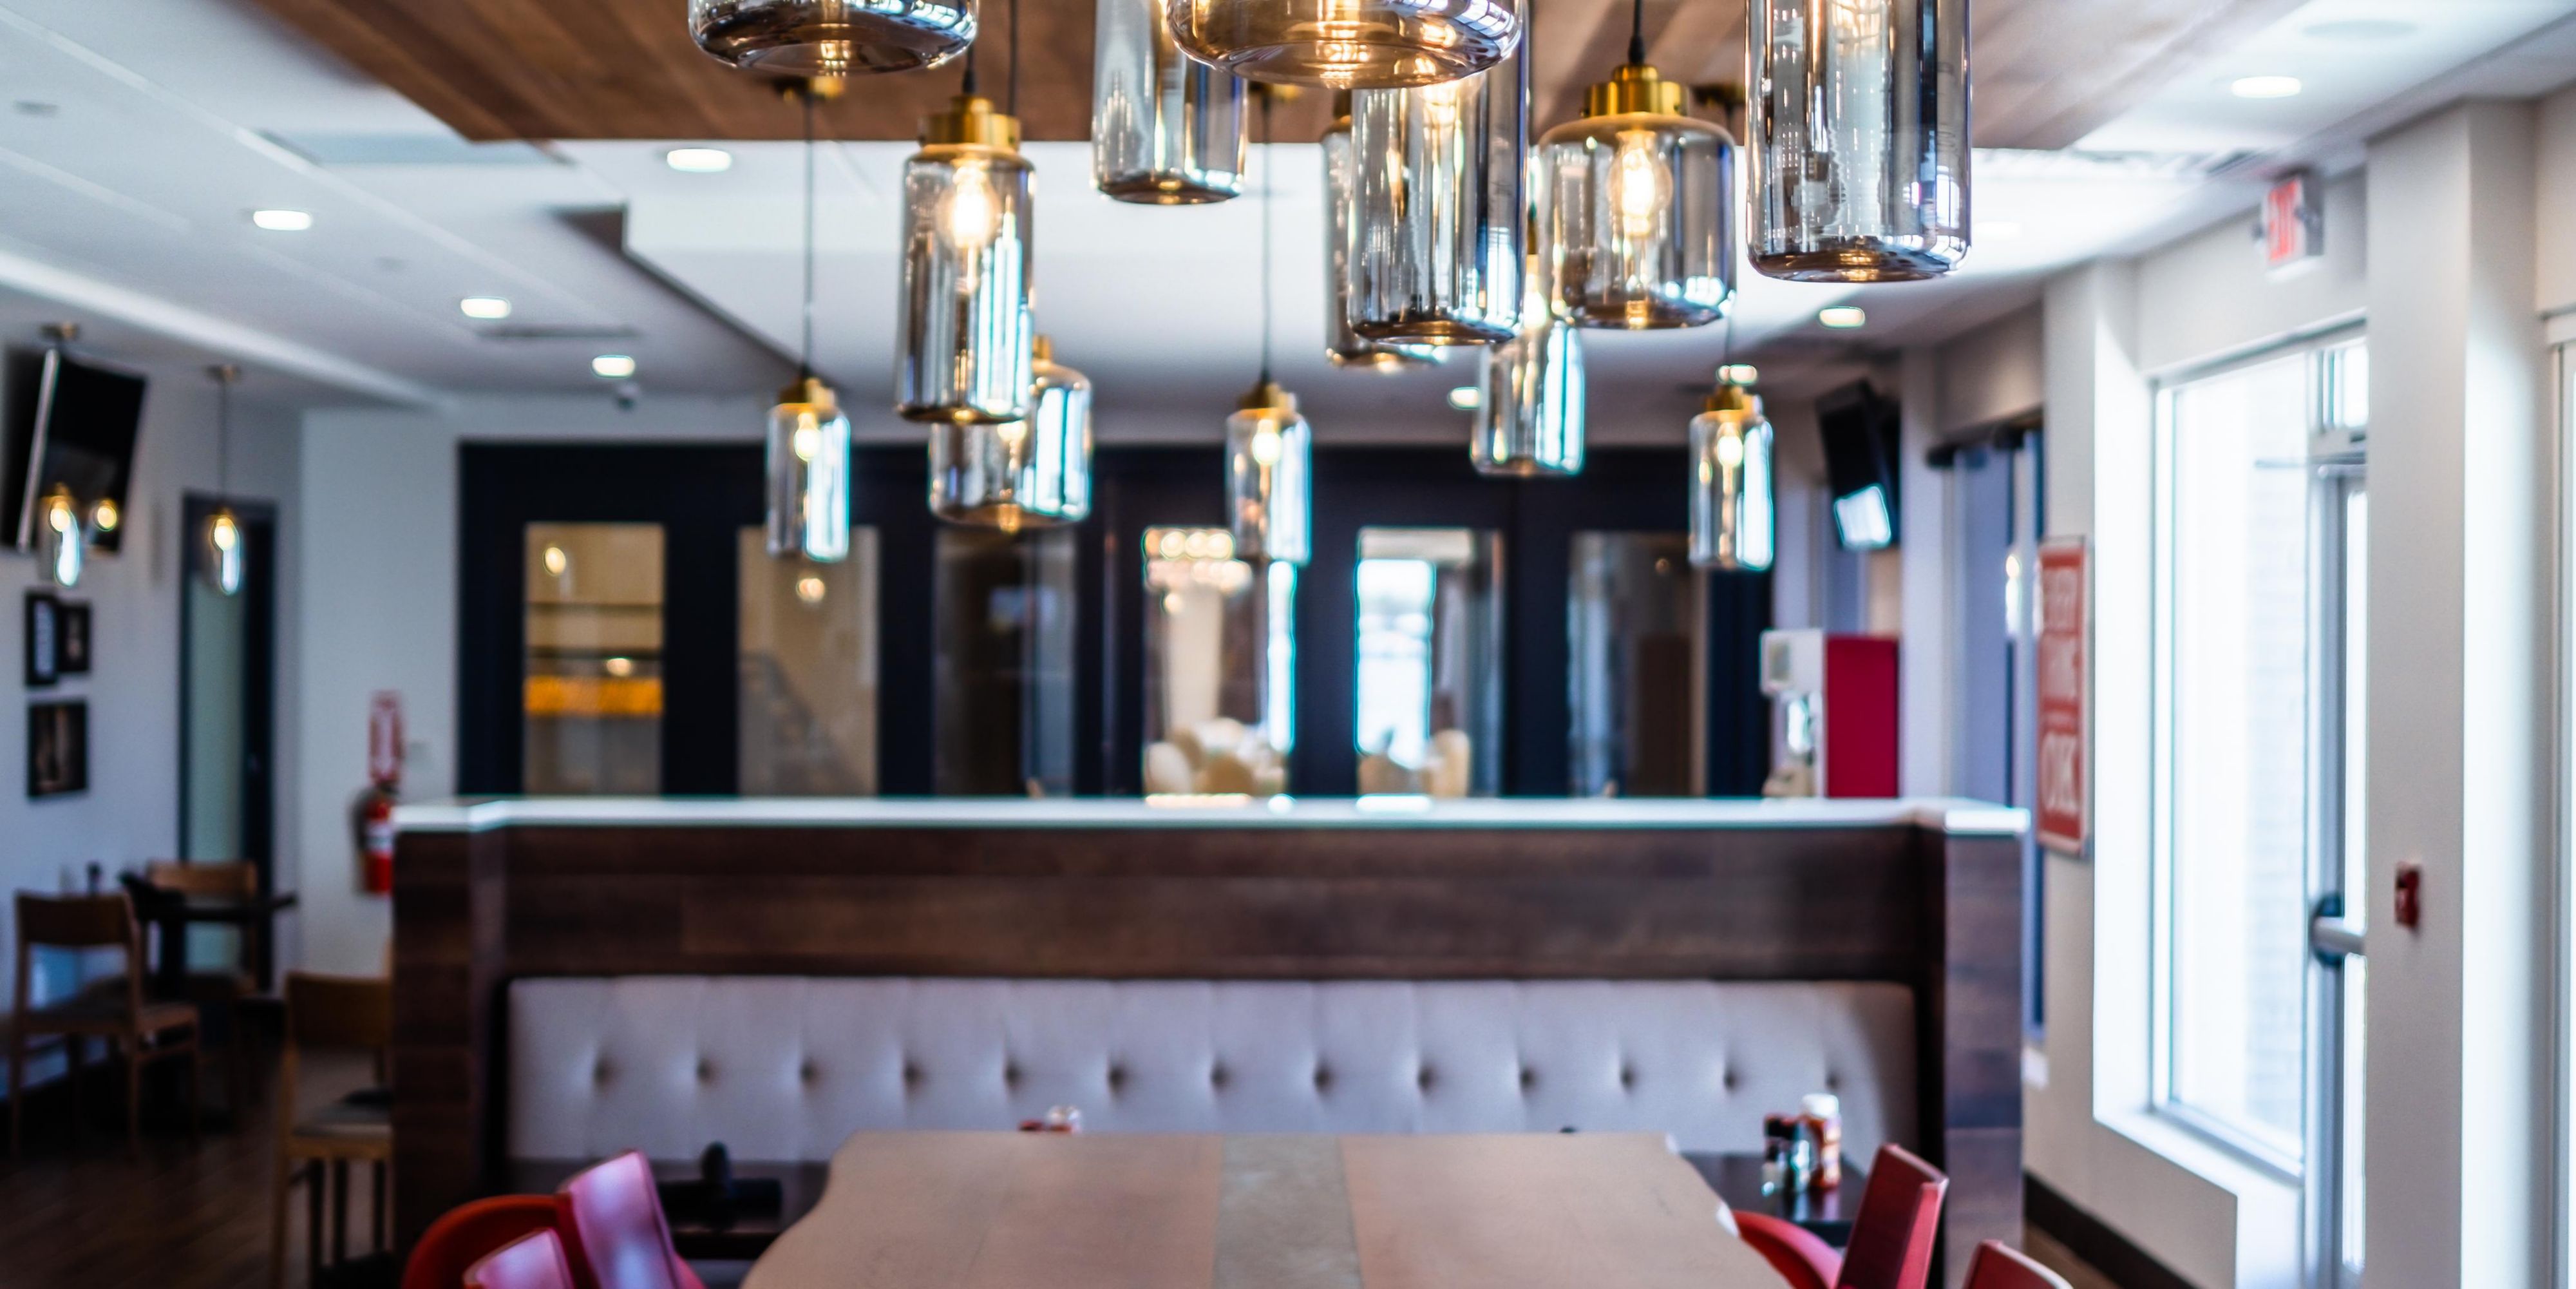 You and your group will enjoy the communal table at Burger Theory